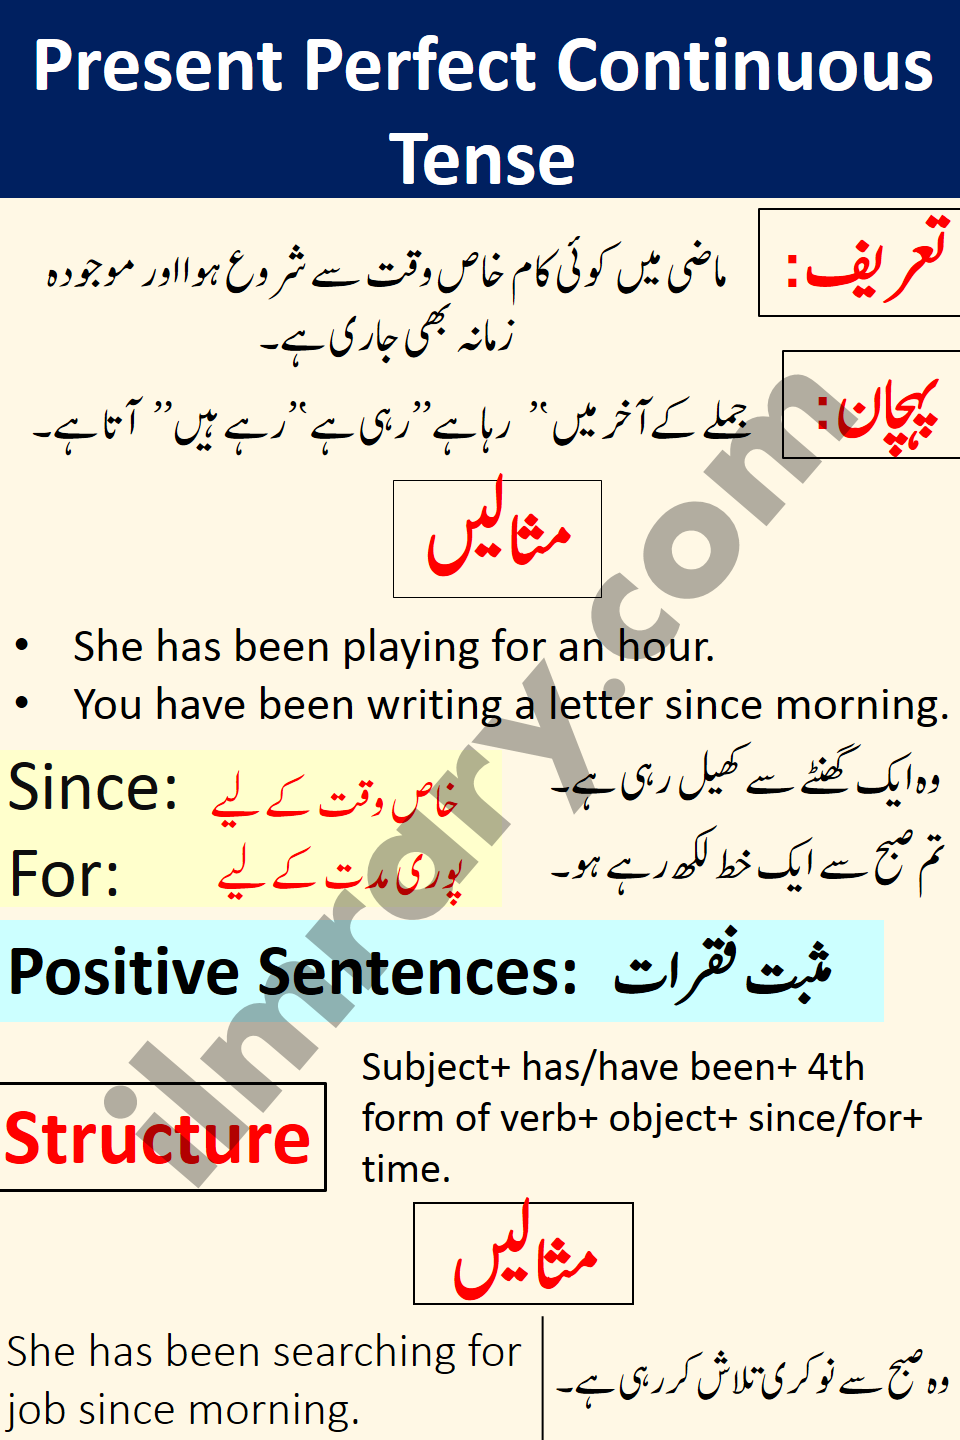 Positive Examples for Present Perfect Continuous Tense in Urdu